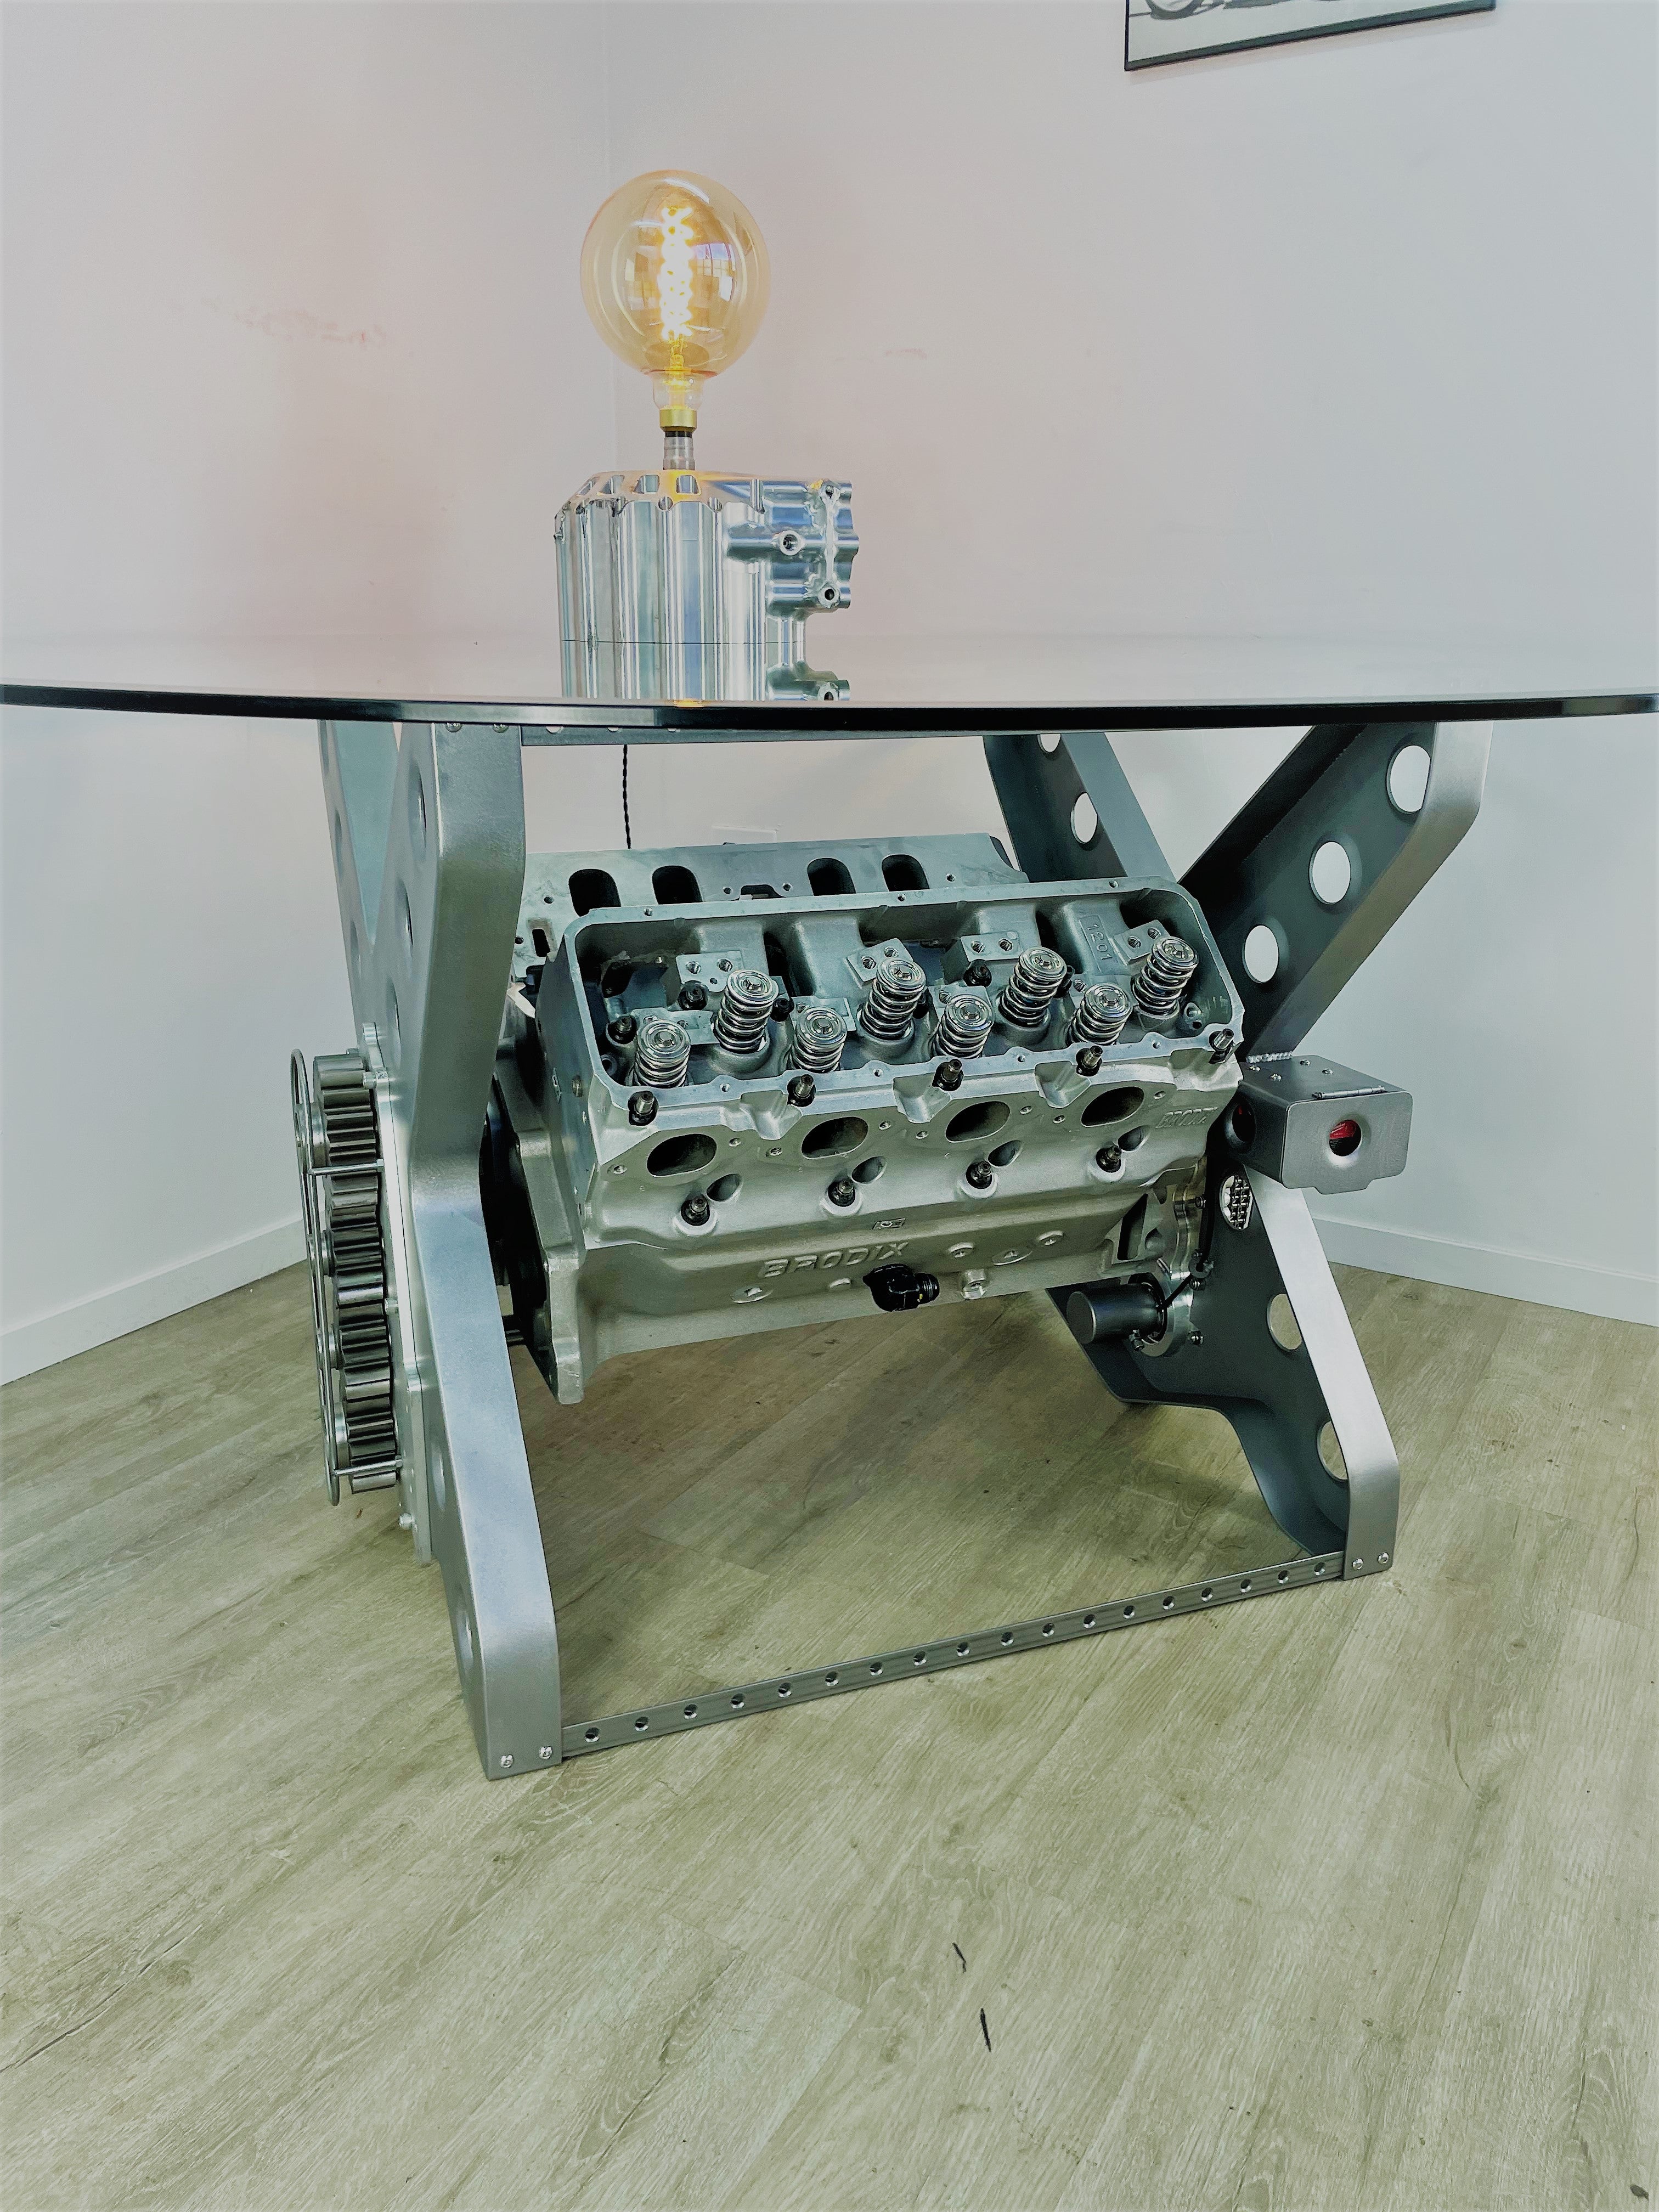 X-frame rotating engine dining table with a round glass top and car part lamp on top.